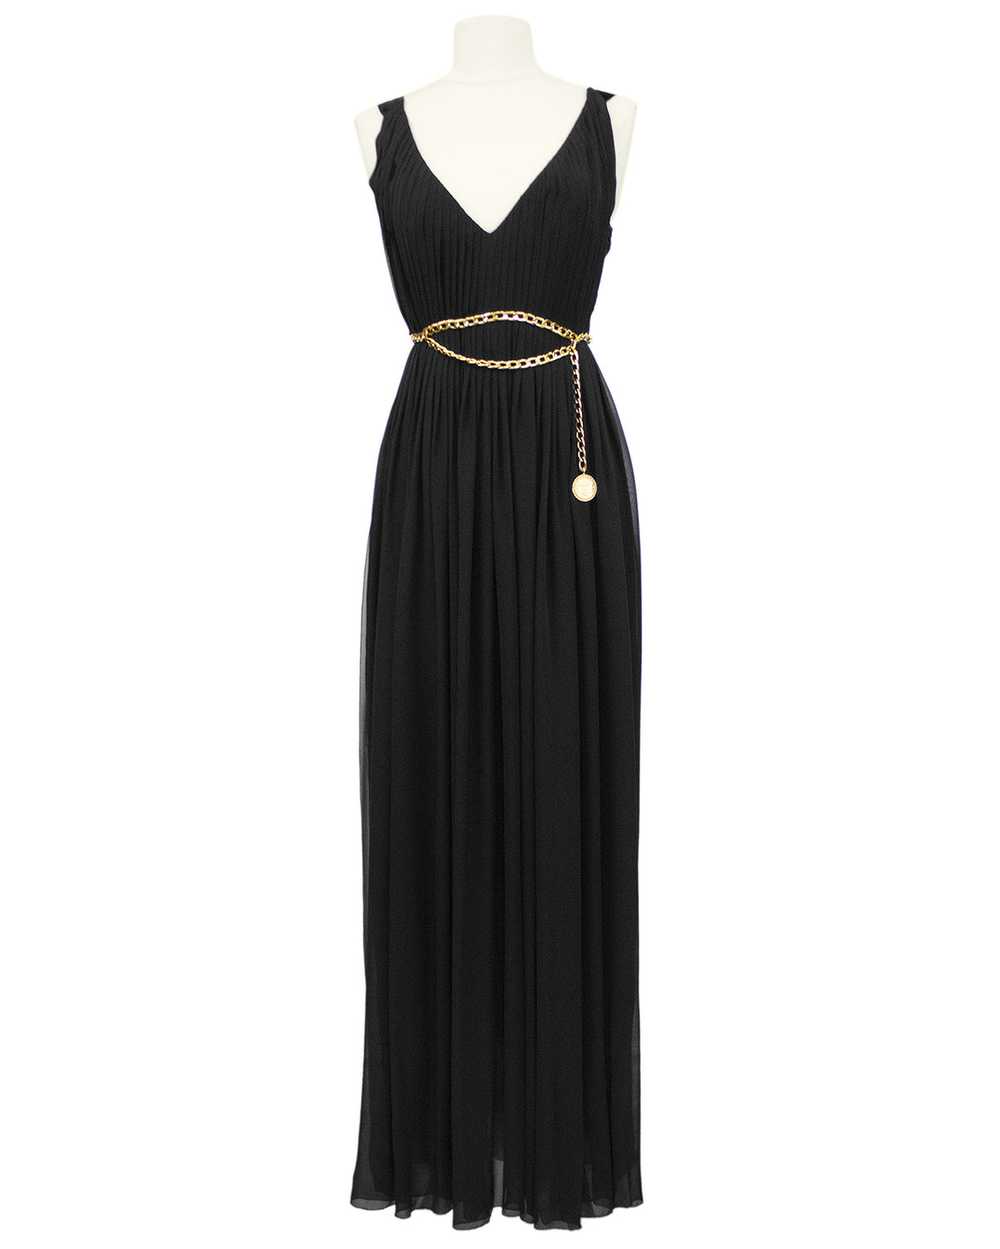 Chanel Black Chiffon Gown with Gold Chain Belt - image 3